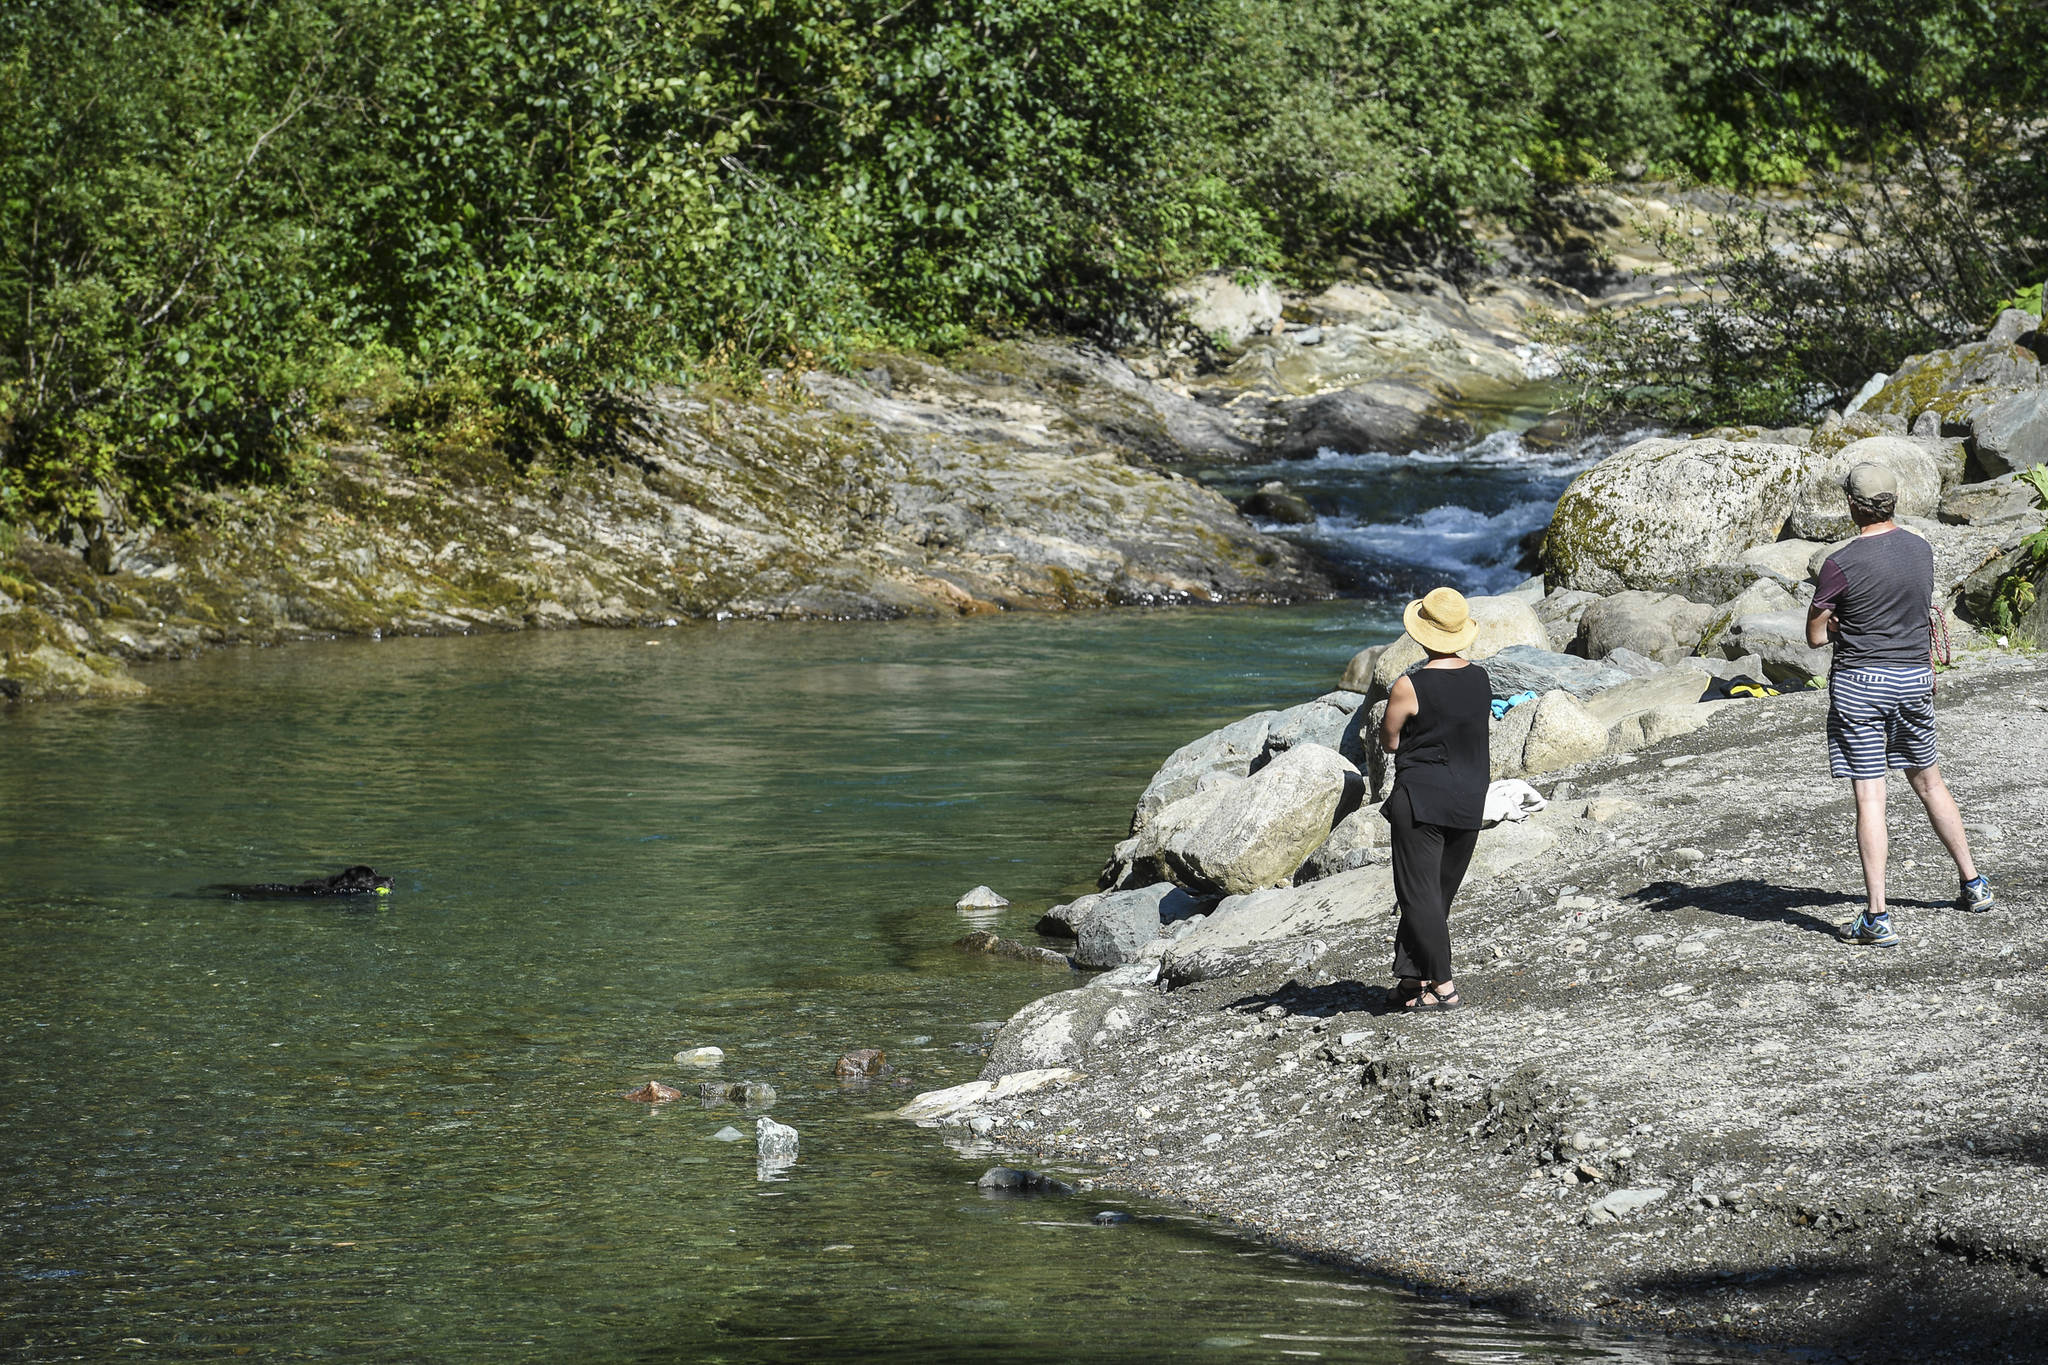 Marta Lastufka and her husband, Michael Bucy, watch their dog, Mo, swim in Gold Creek at Cope Park on Tuesday, Aug. 6, 2019. (Michael Penn | Juneau Empire)